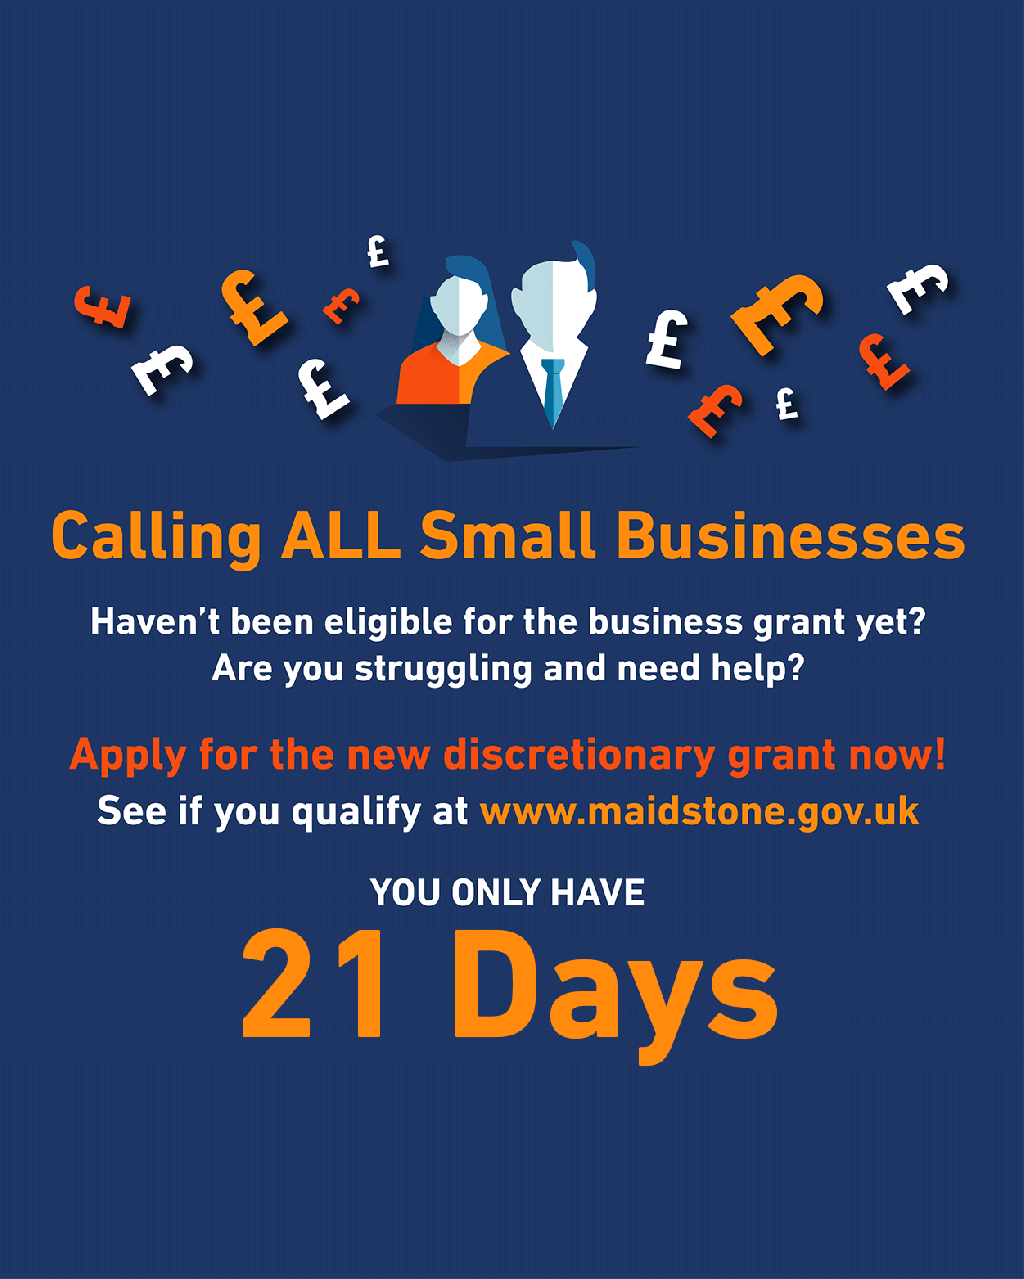 Don’t delay - apply today for business grant says MBC  image